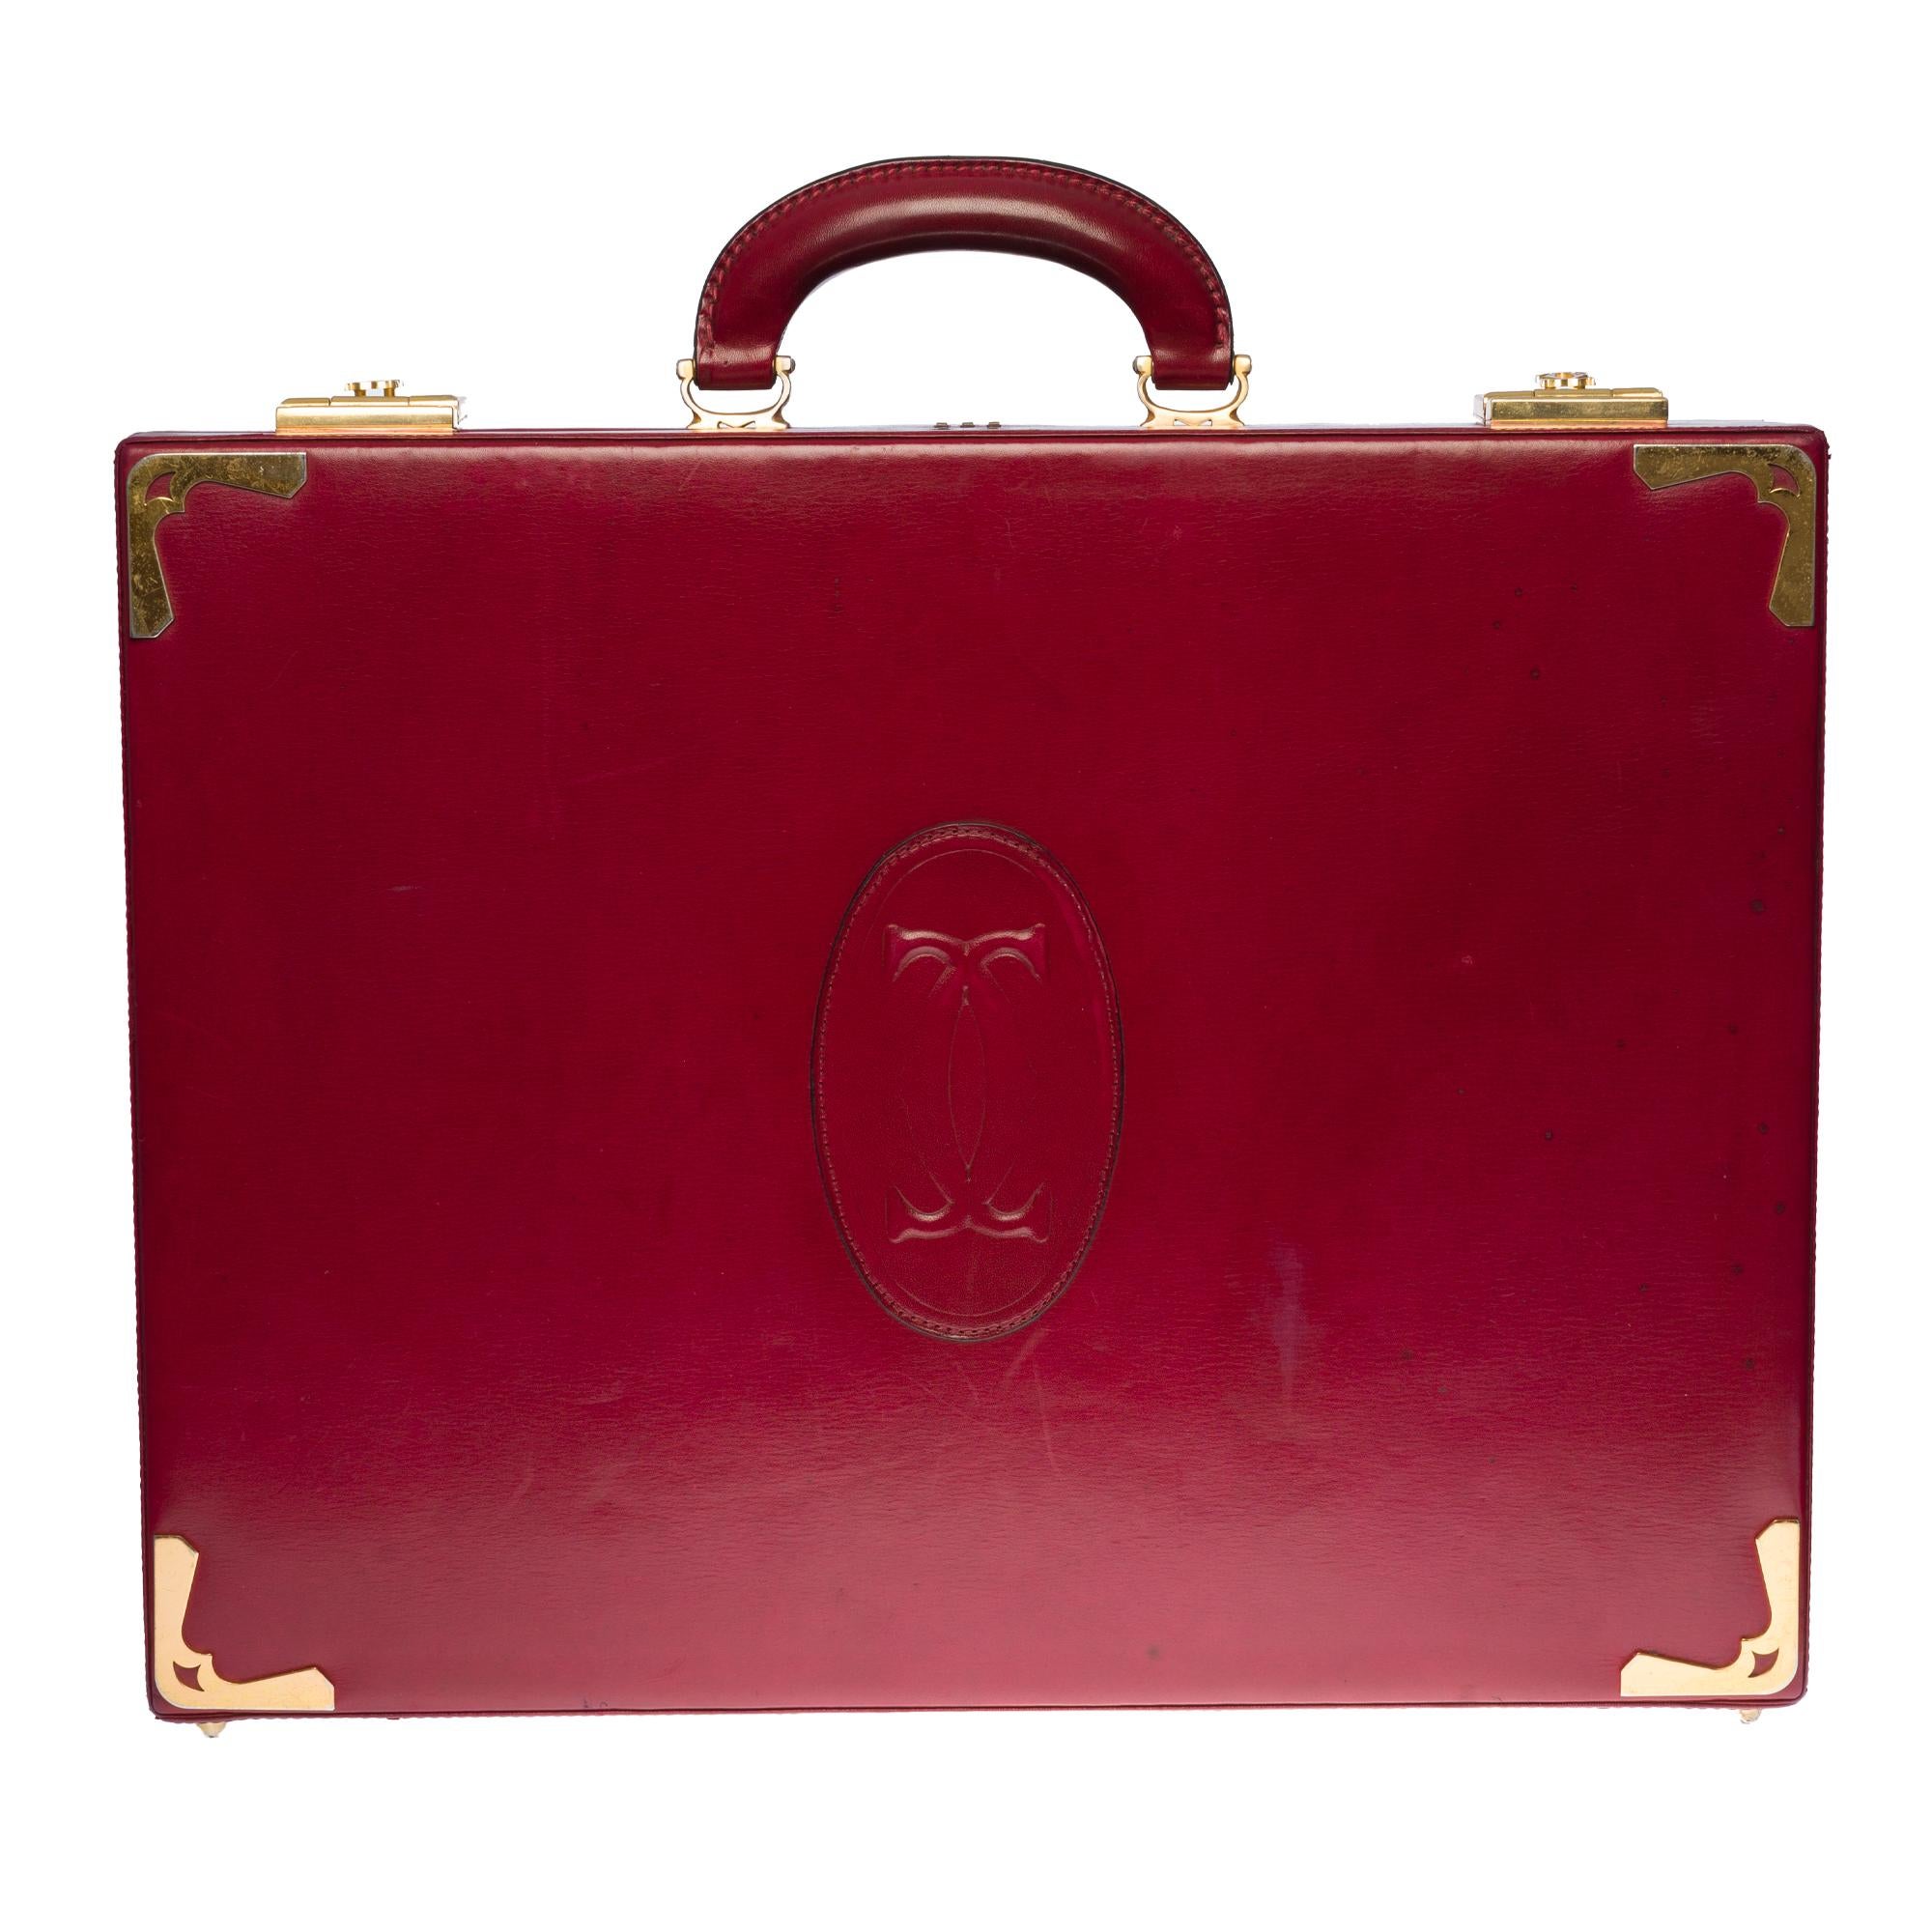 Superb collector’s Piece for collectors!

MUST DE CARTIER Attaché case in burgundy leather enhanced with the medallion logo.
Gold metal locks, fasteners and corners, burgundy leather handle, burgundy leather compartment inside.
Signature: 